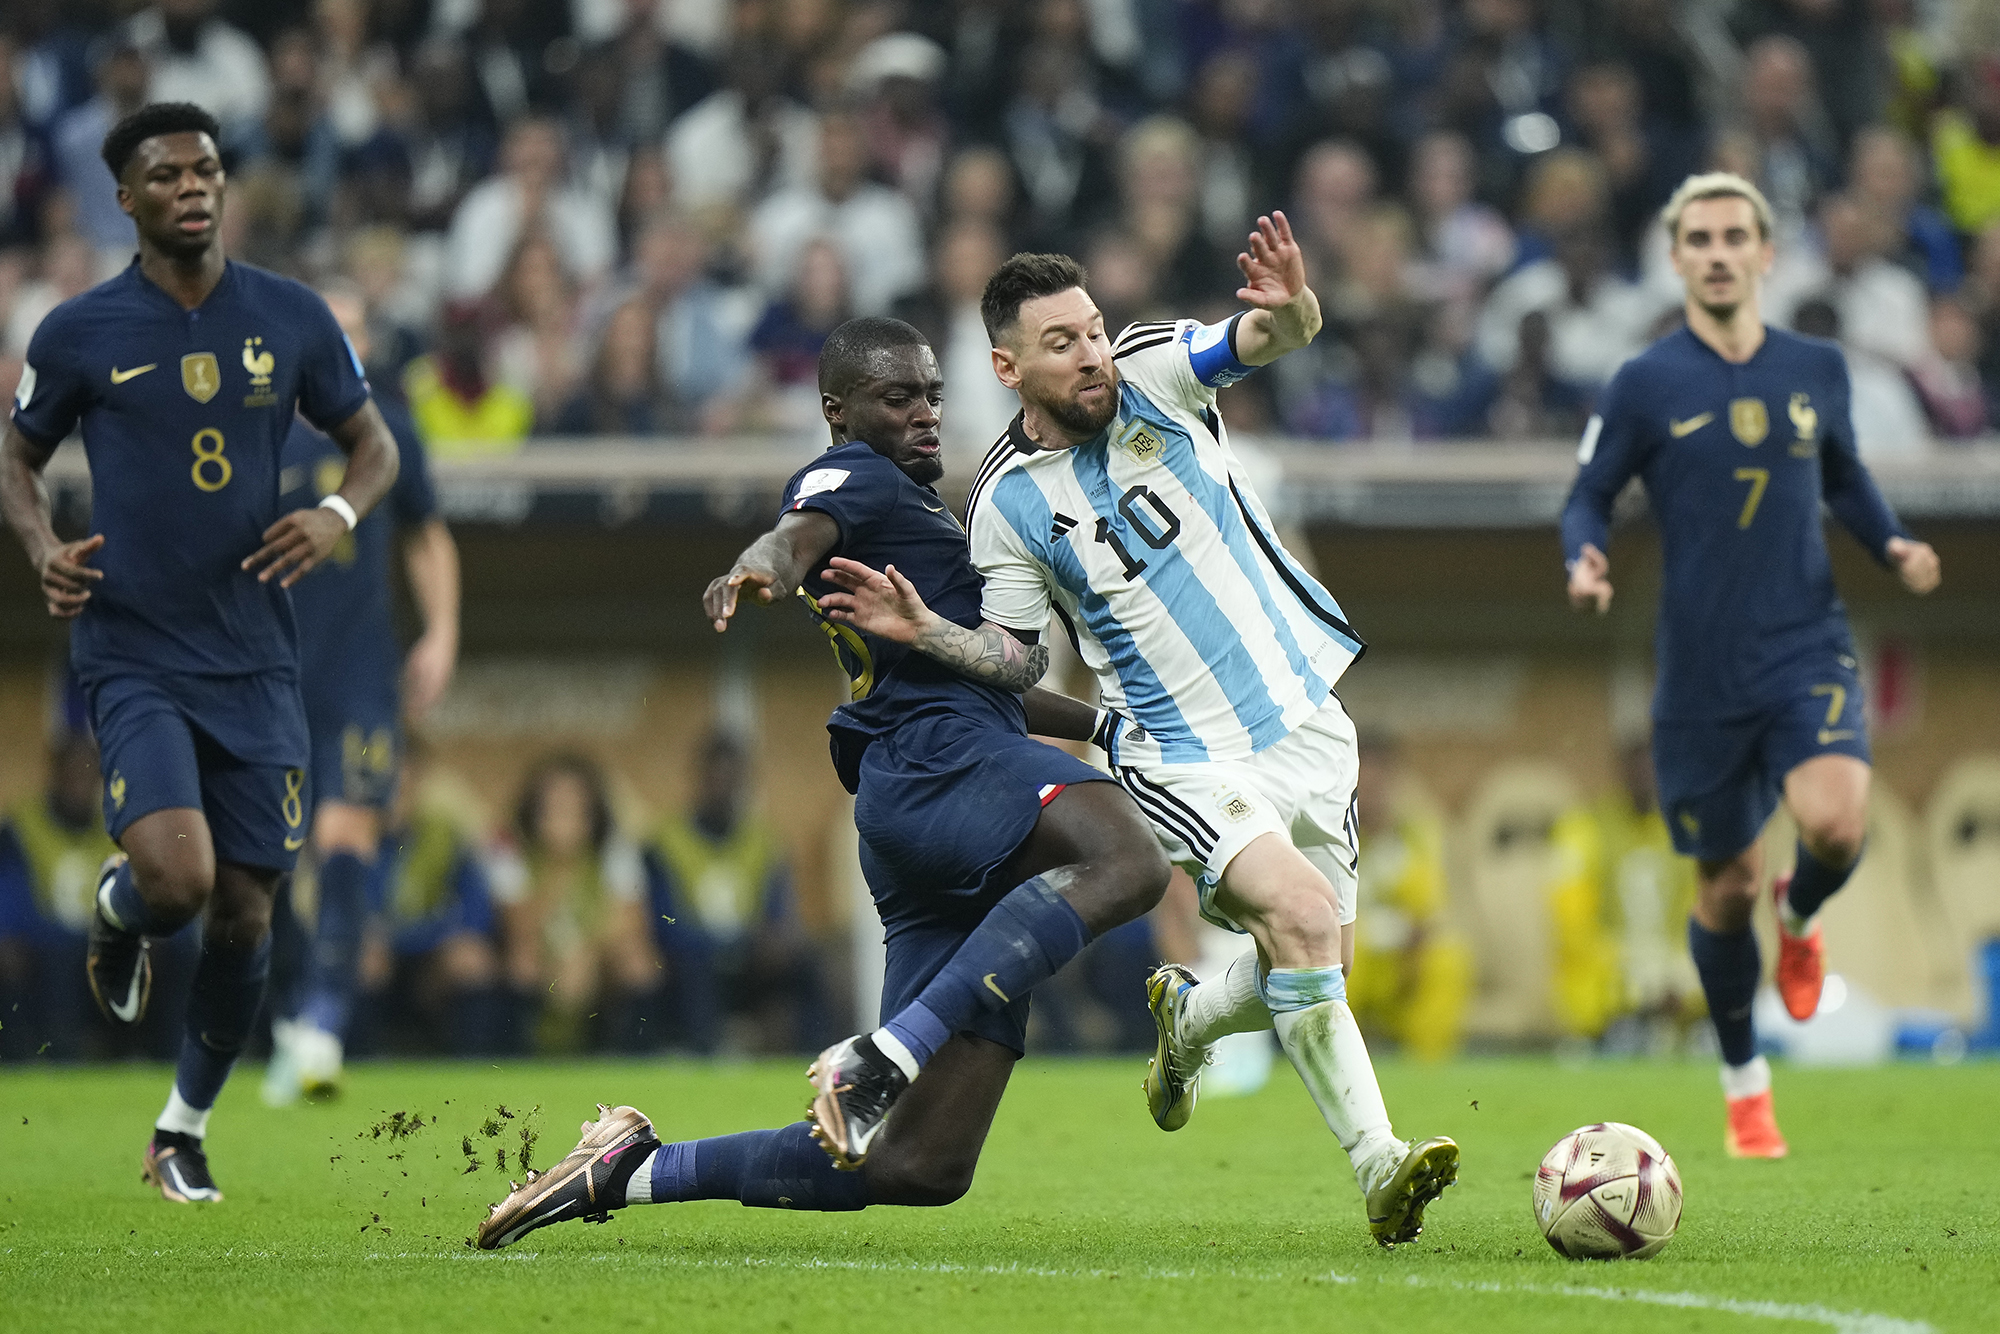 Messi tries to avoid a tackle from Upamecano.